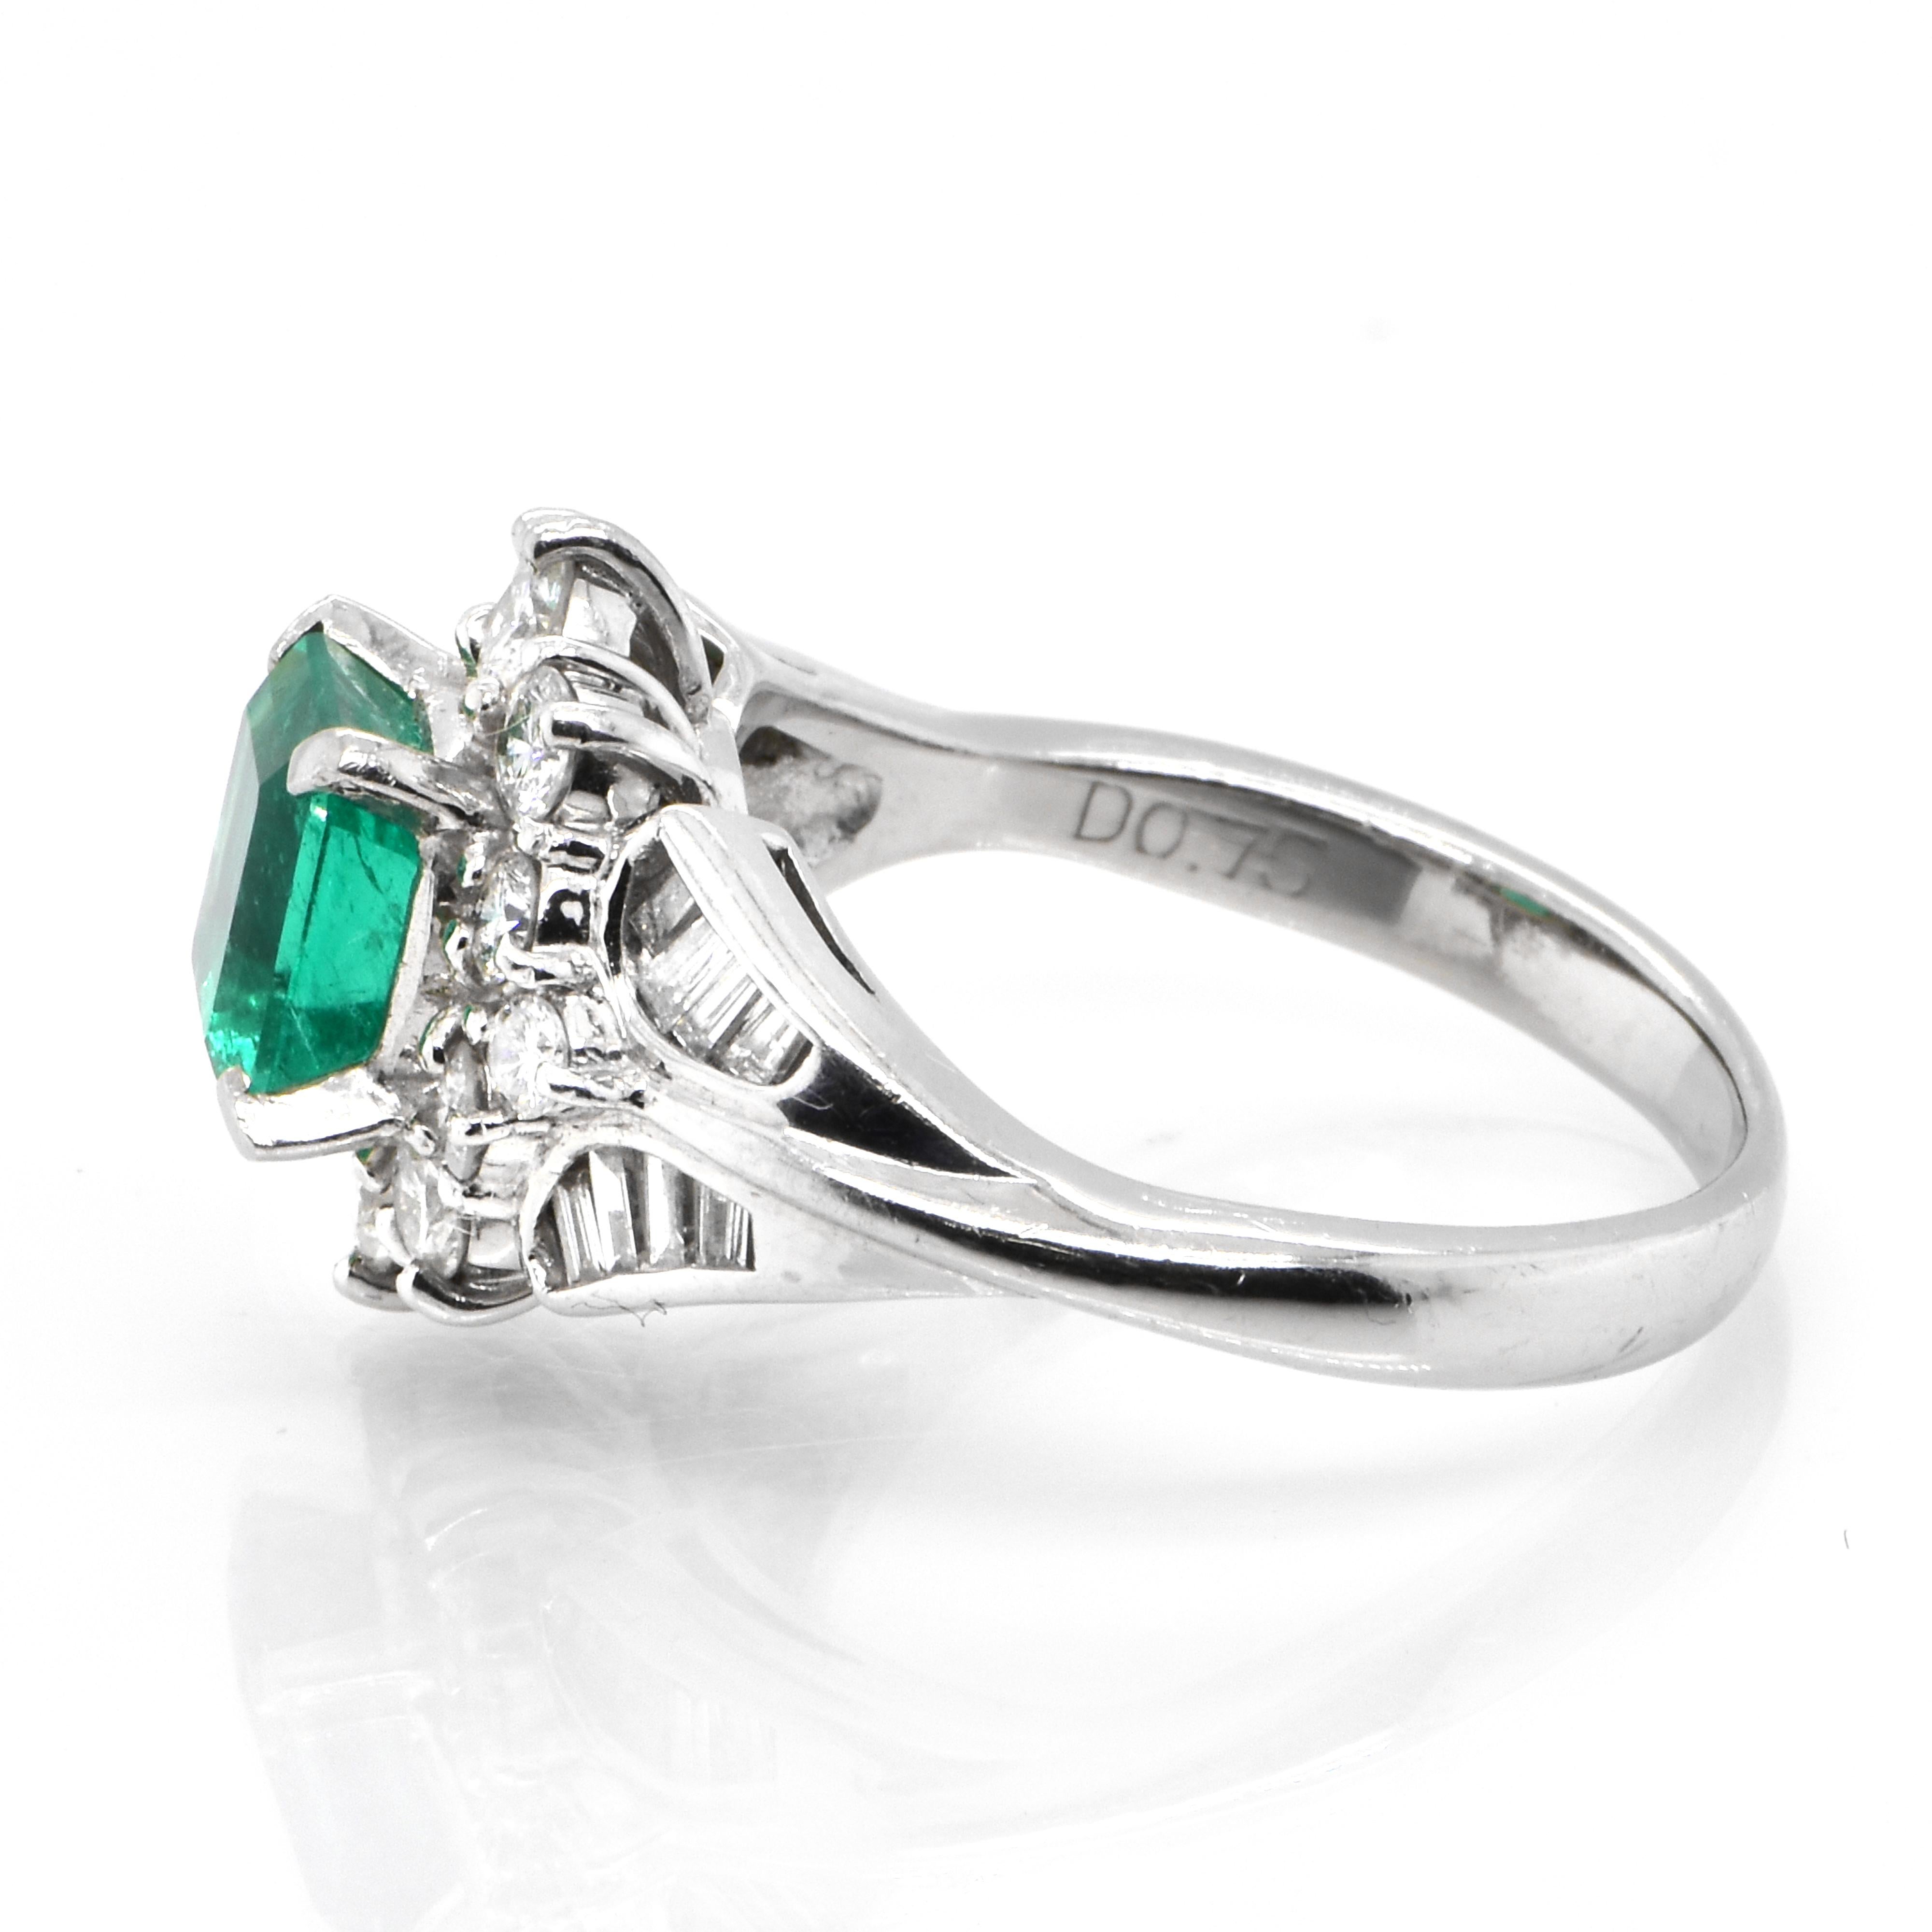 Emerald Cut 1.27 Carat Natural Colombian Emerald and Diamond Ring Made in Platinum For Sale